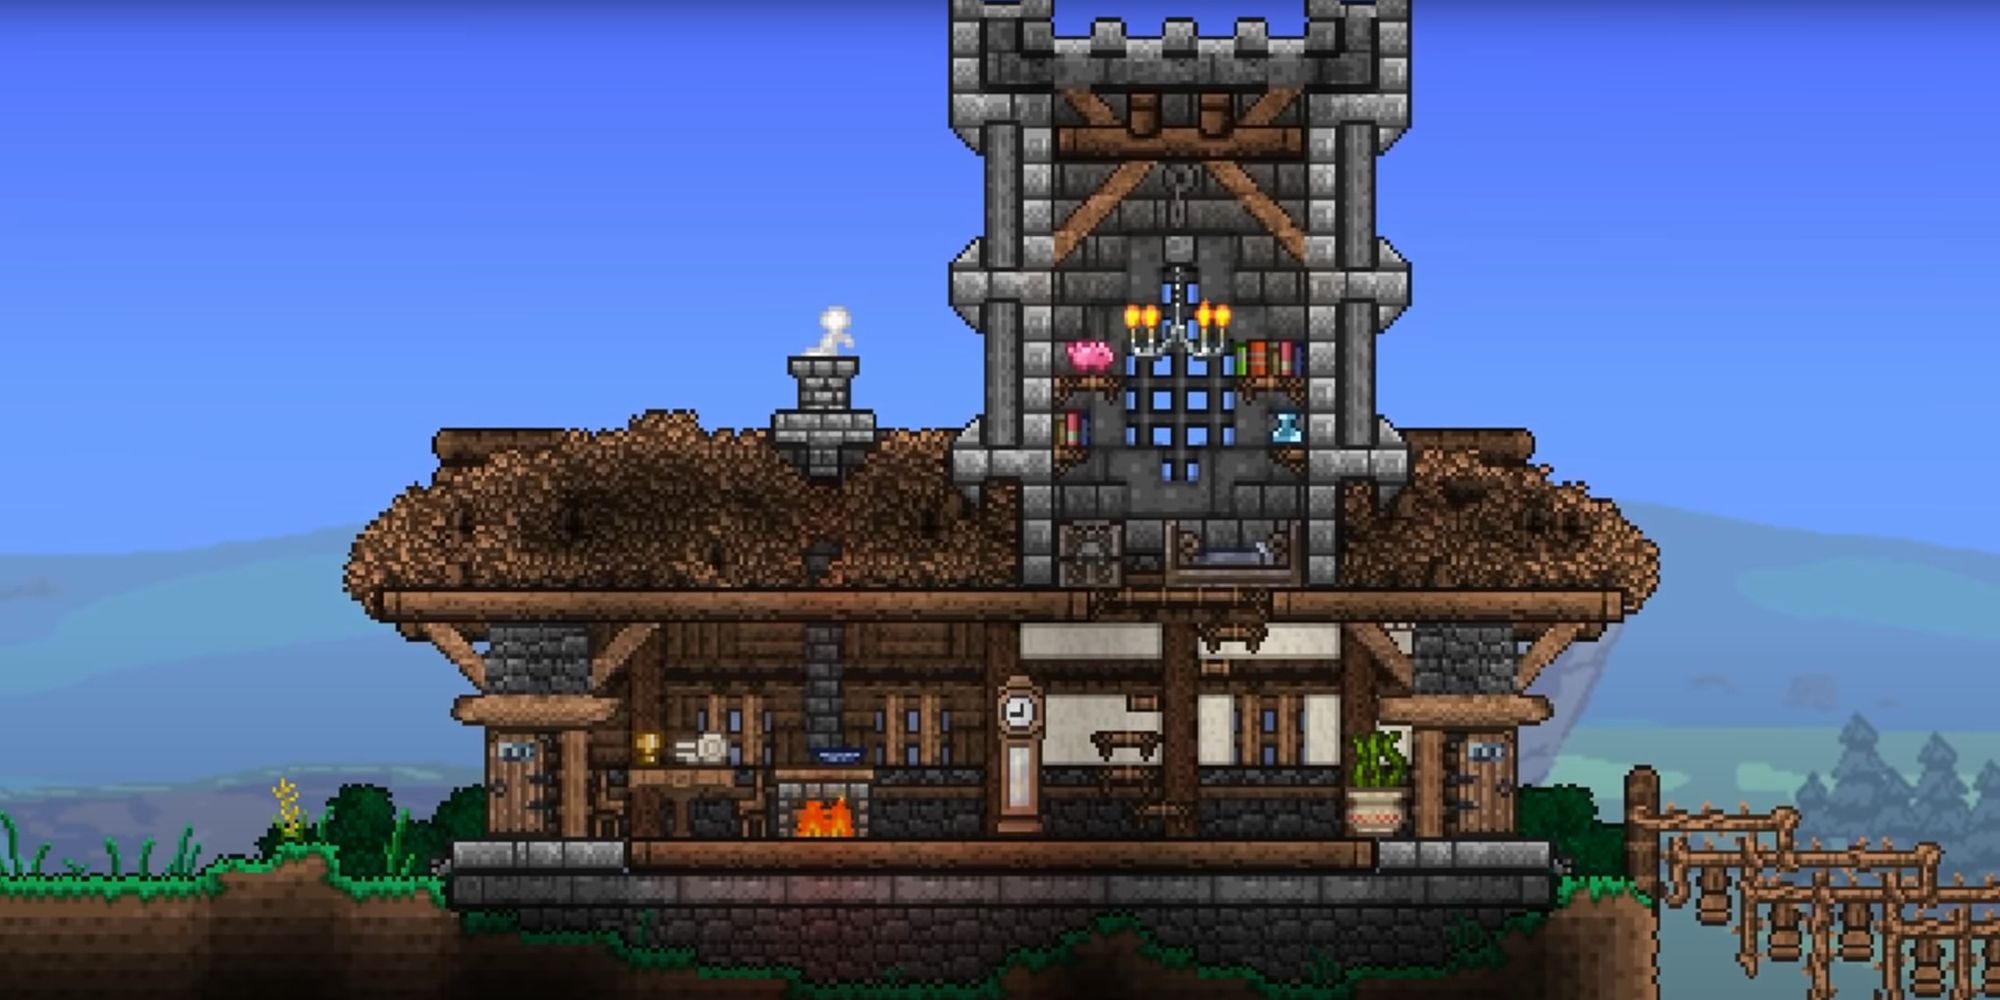 An image from Terraria of a Medieval house. This build is equipped with a stone tower and gothic decorations that make the build appear from a different time period.